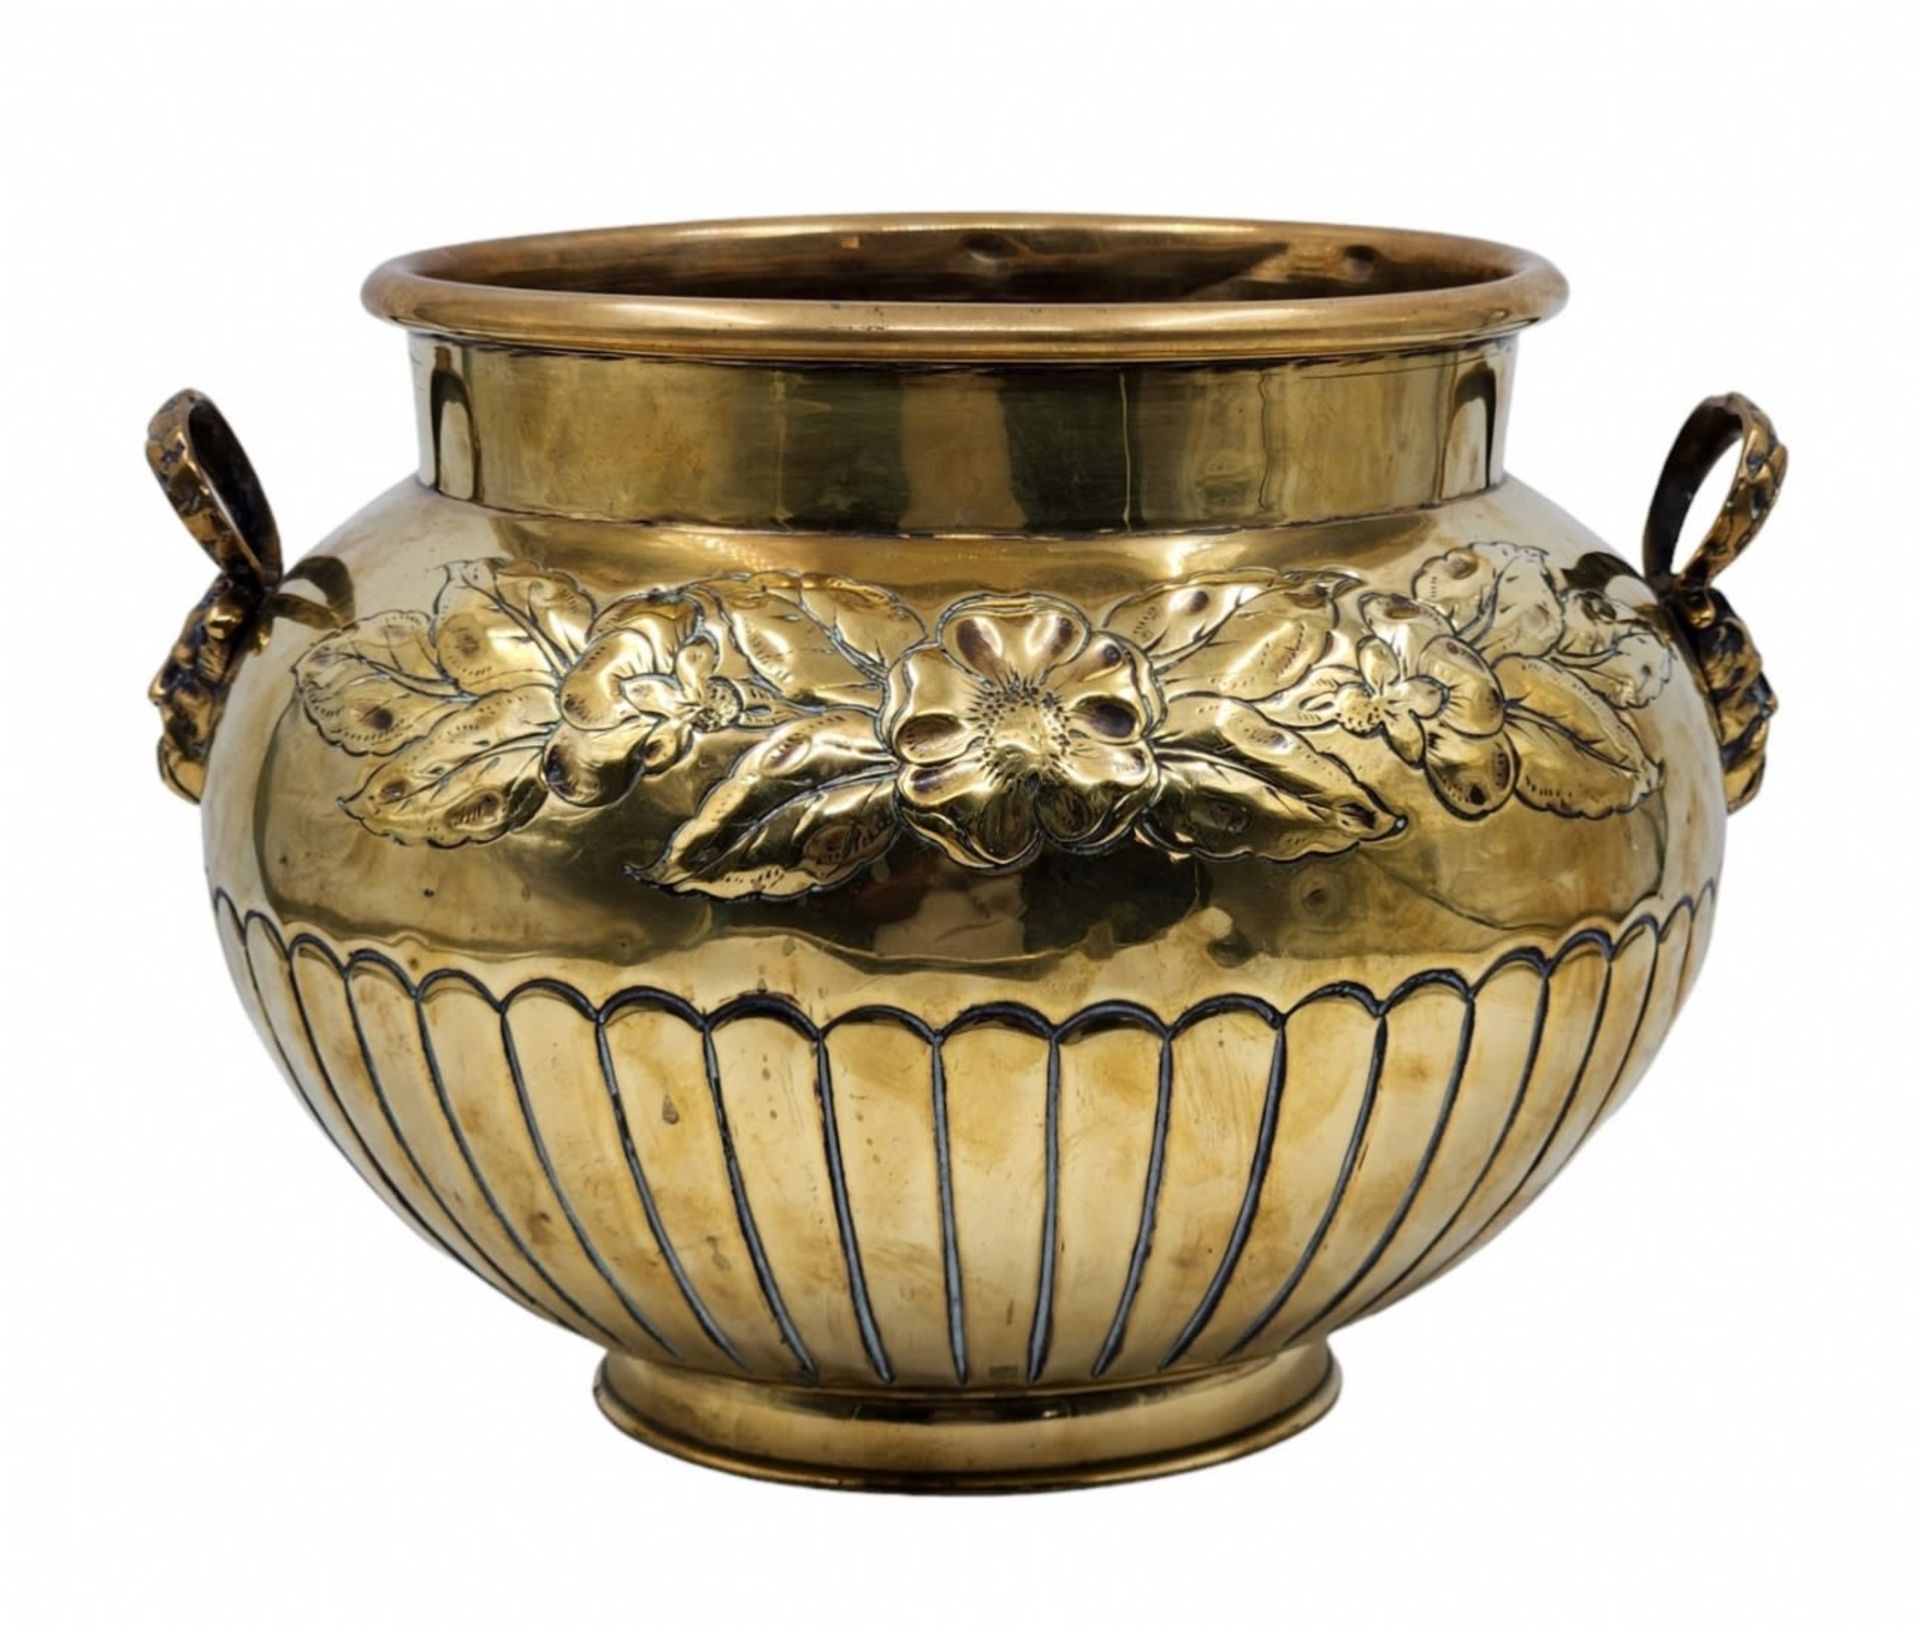 Antique English pot (Jardiniere), jardiniere from the 19th century (Victorian), made of brass. Width